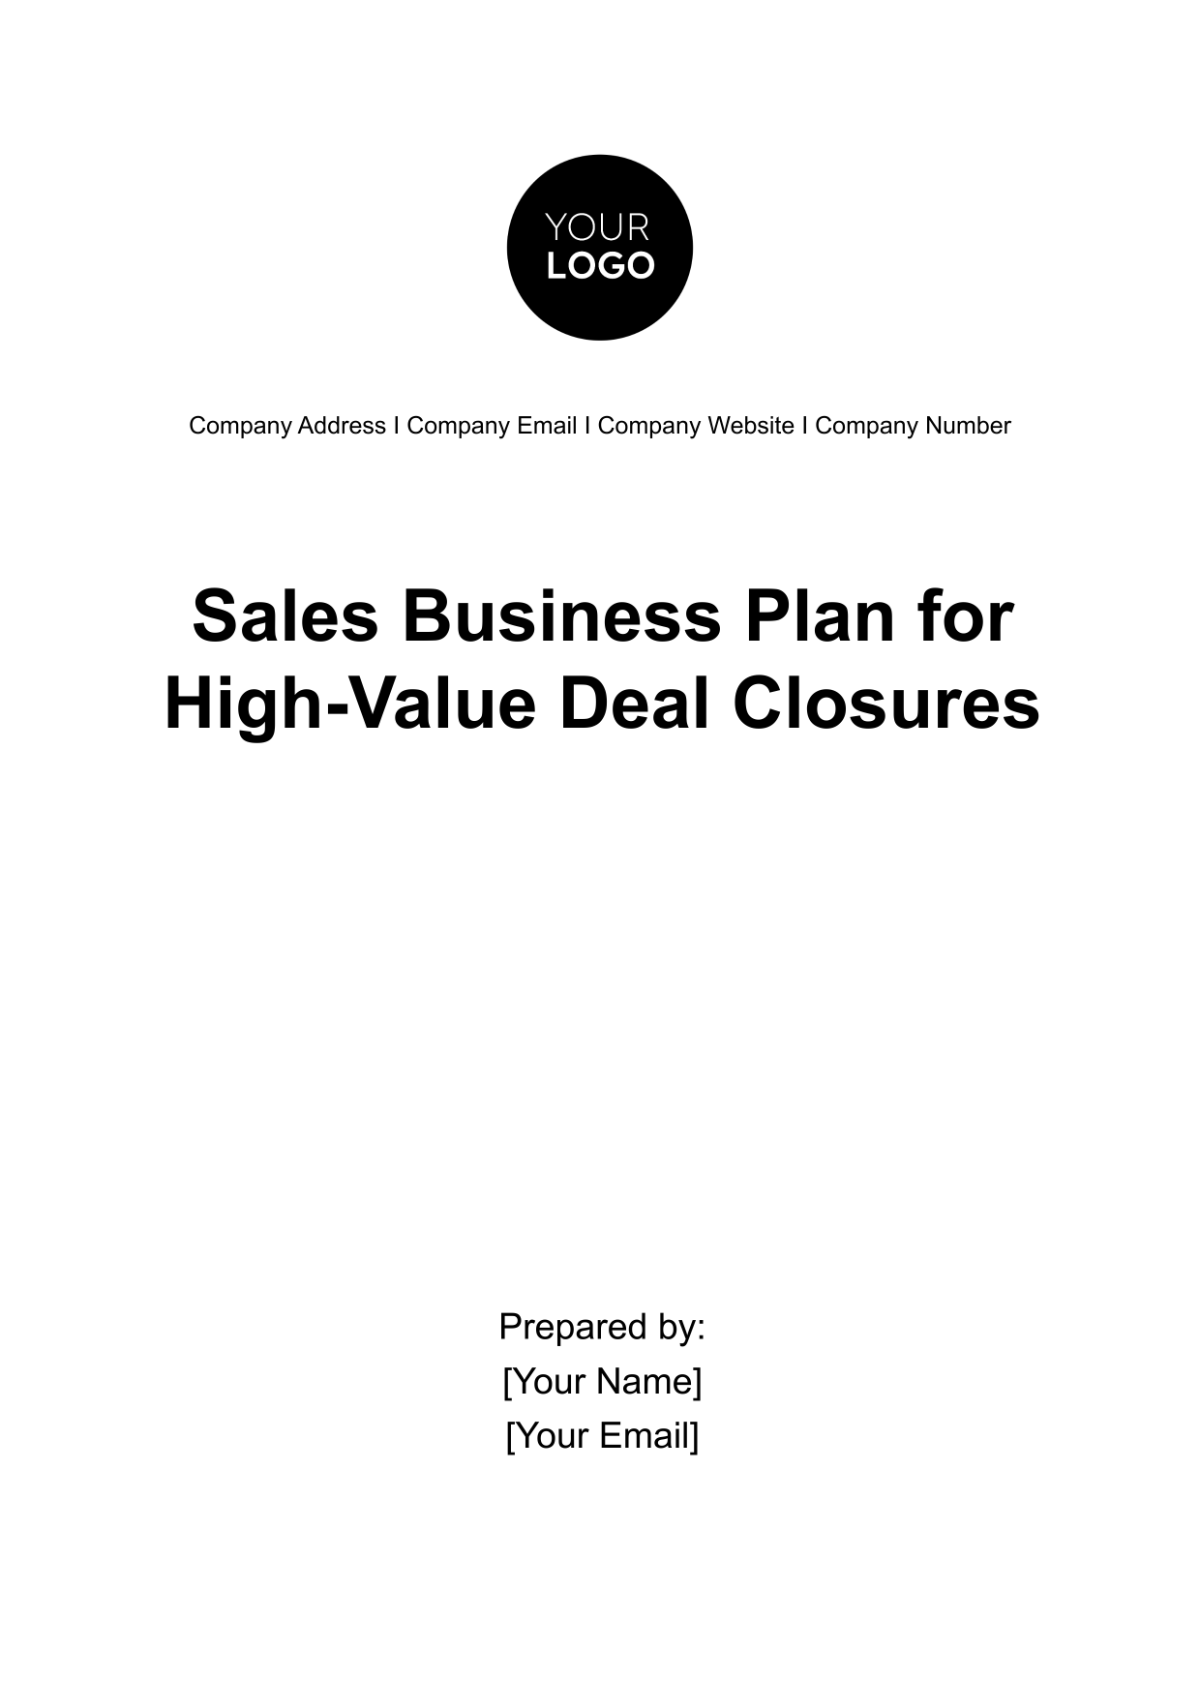 Free Sales Business Plan for High-Value Deal Closures Template